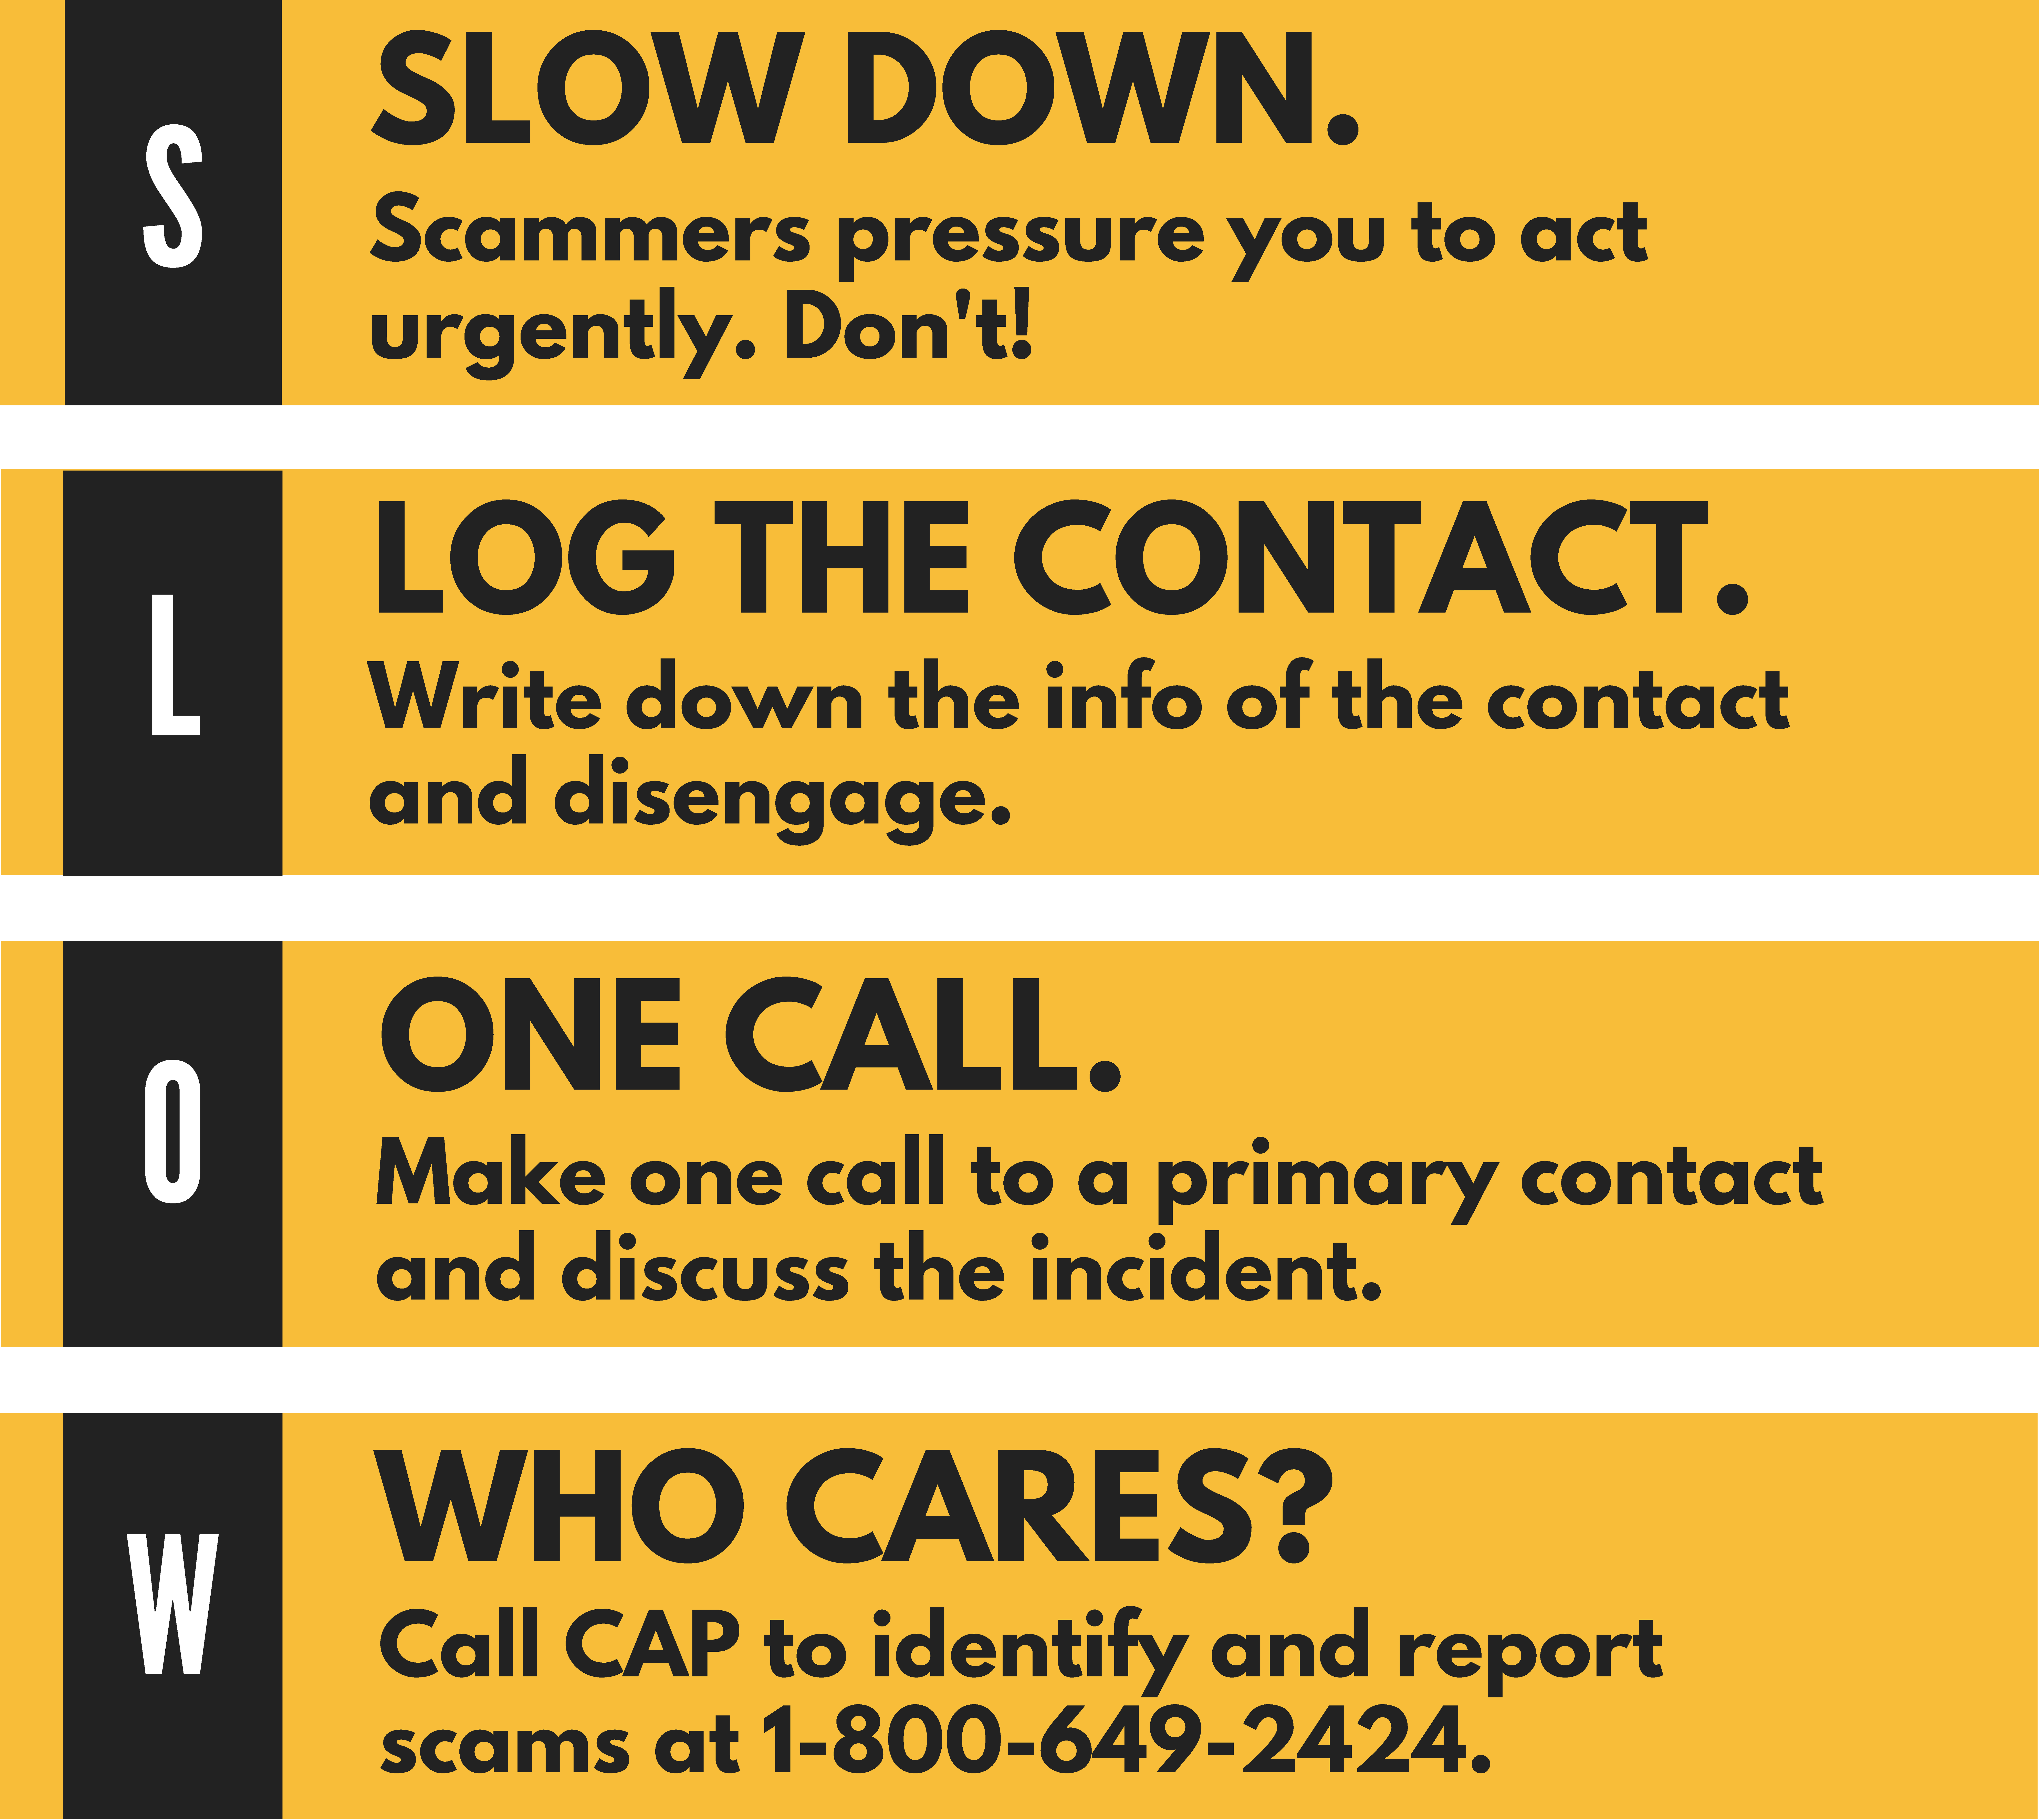 Slow down, log the contact. Make One call to a contact, Call an organization who cares